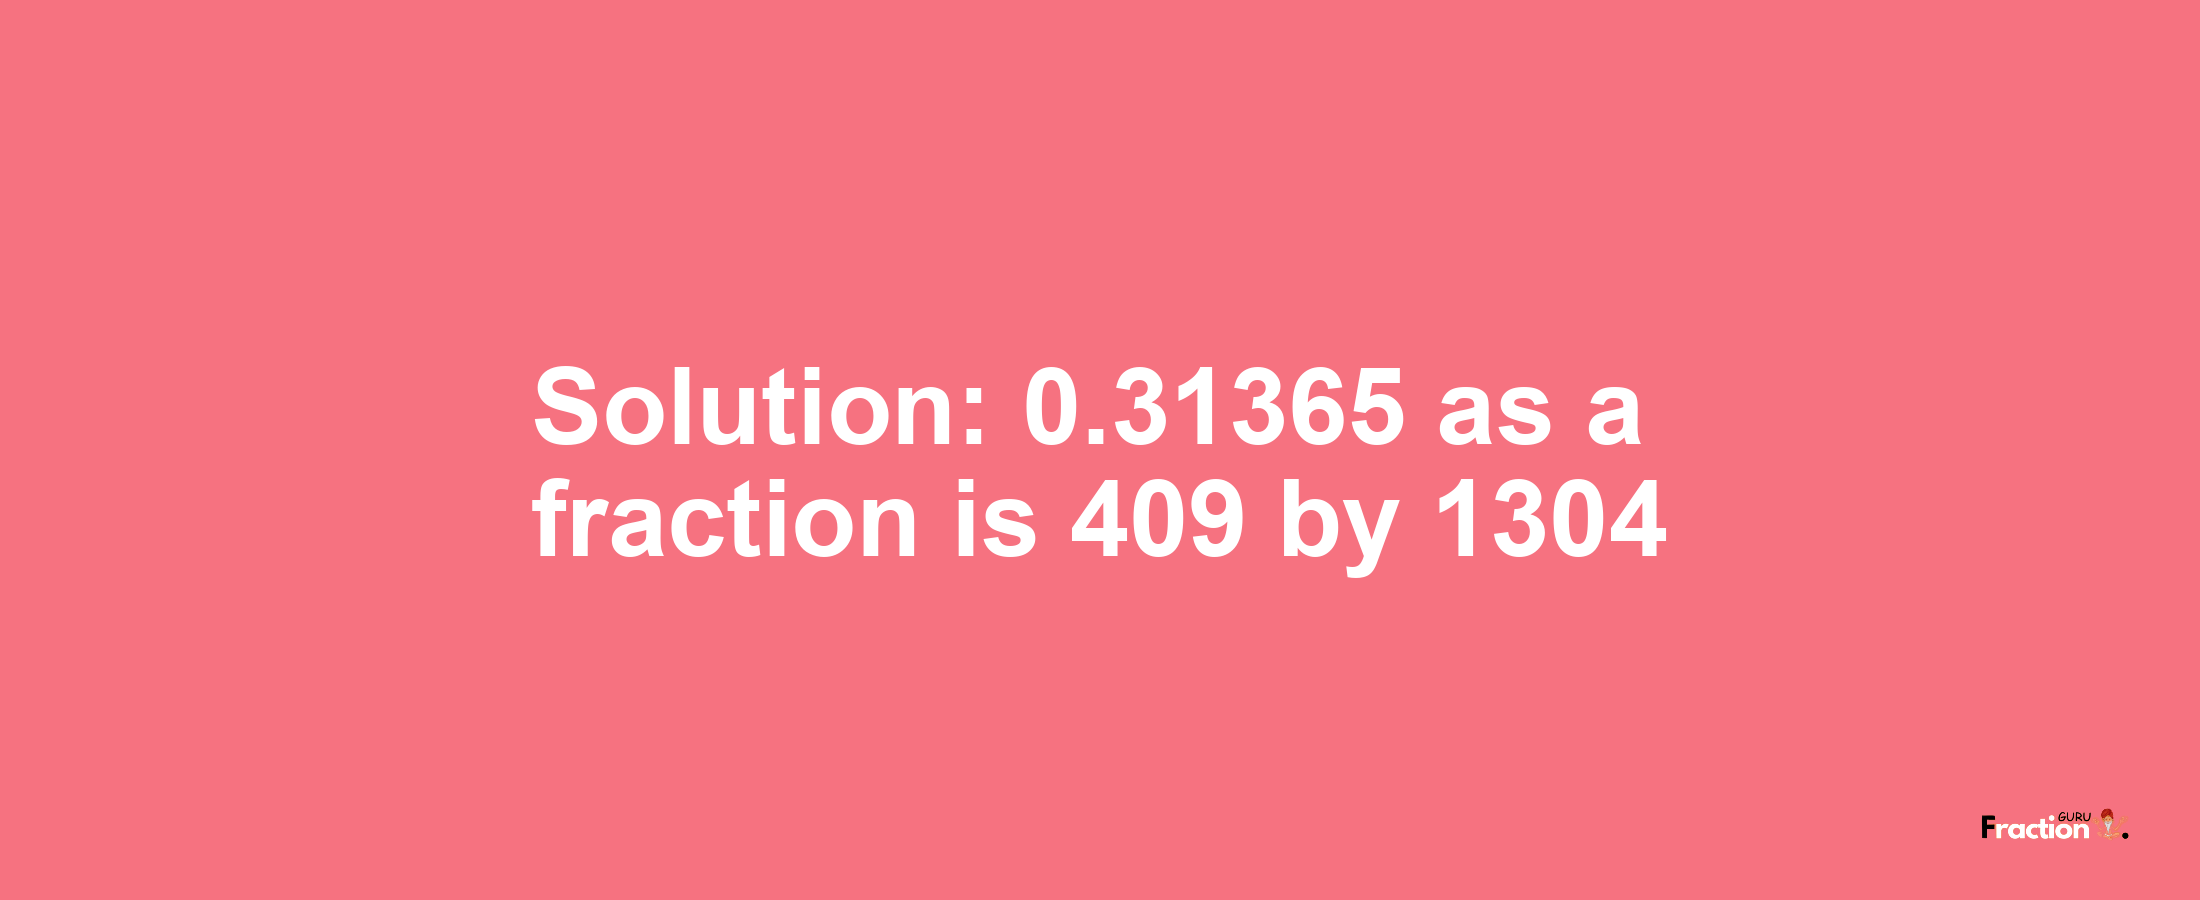 Solution:0.31365 as a fraction is 409/1304